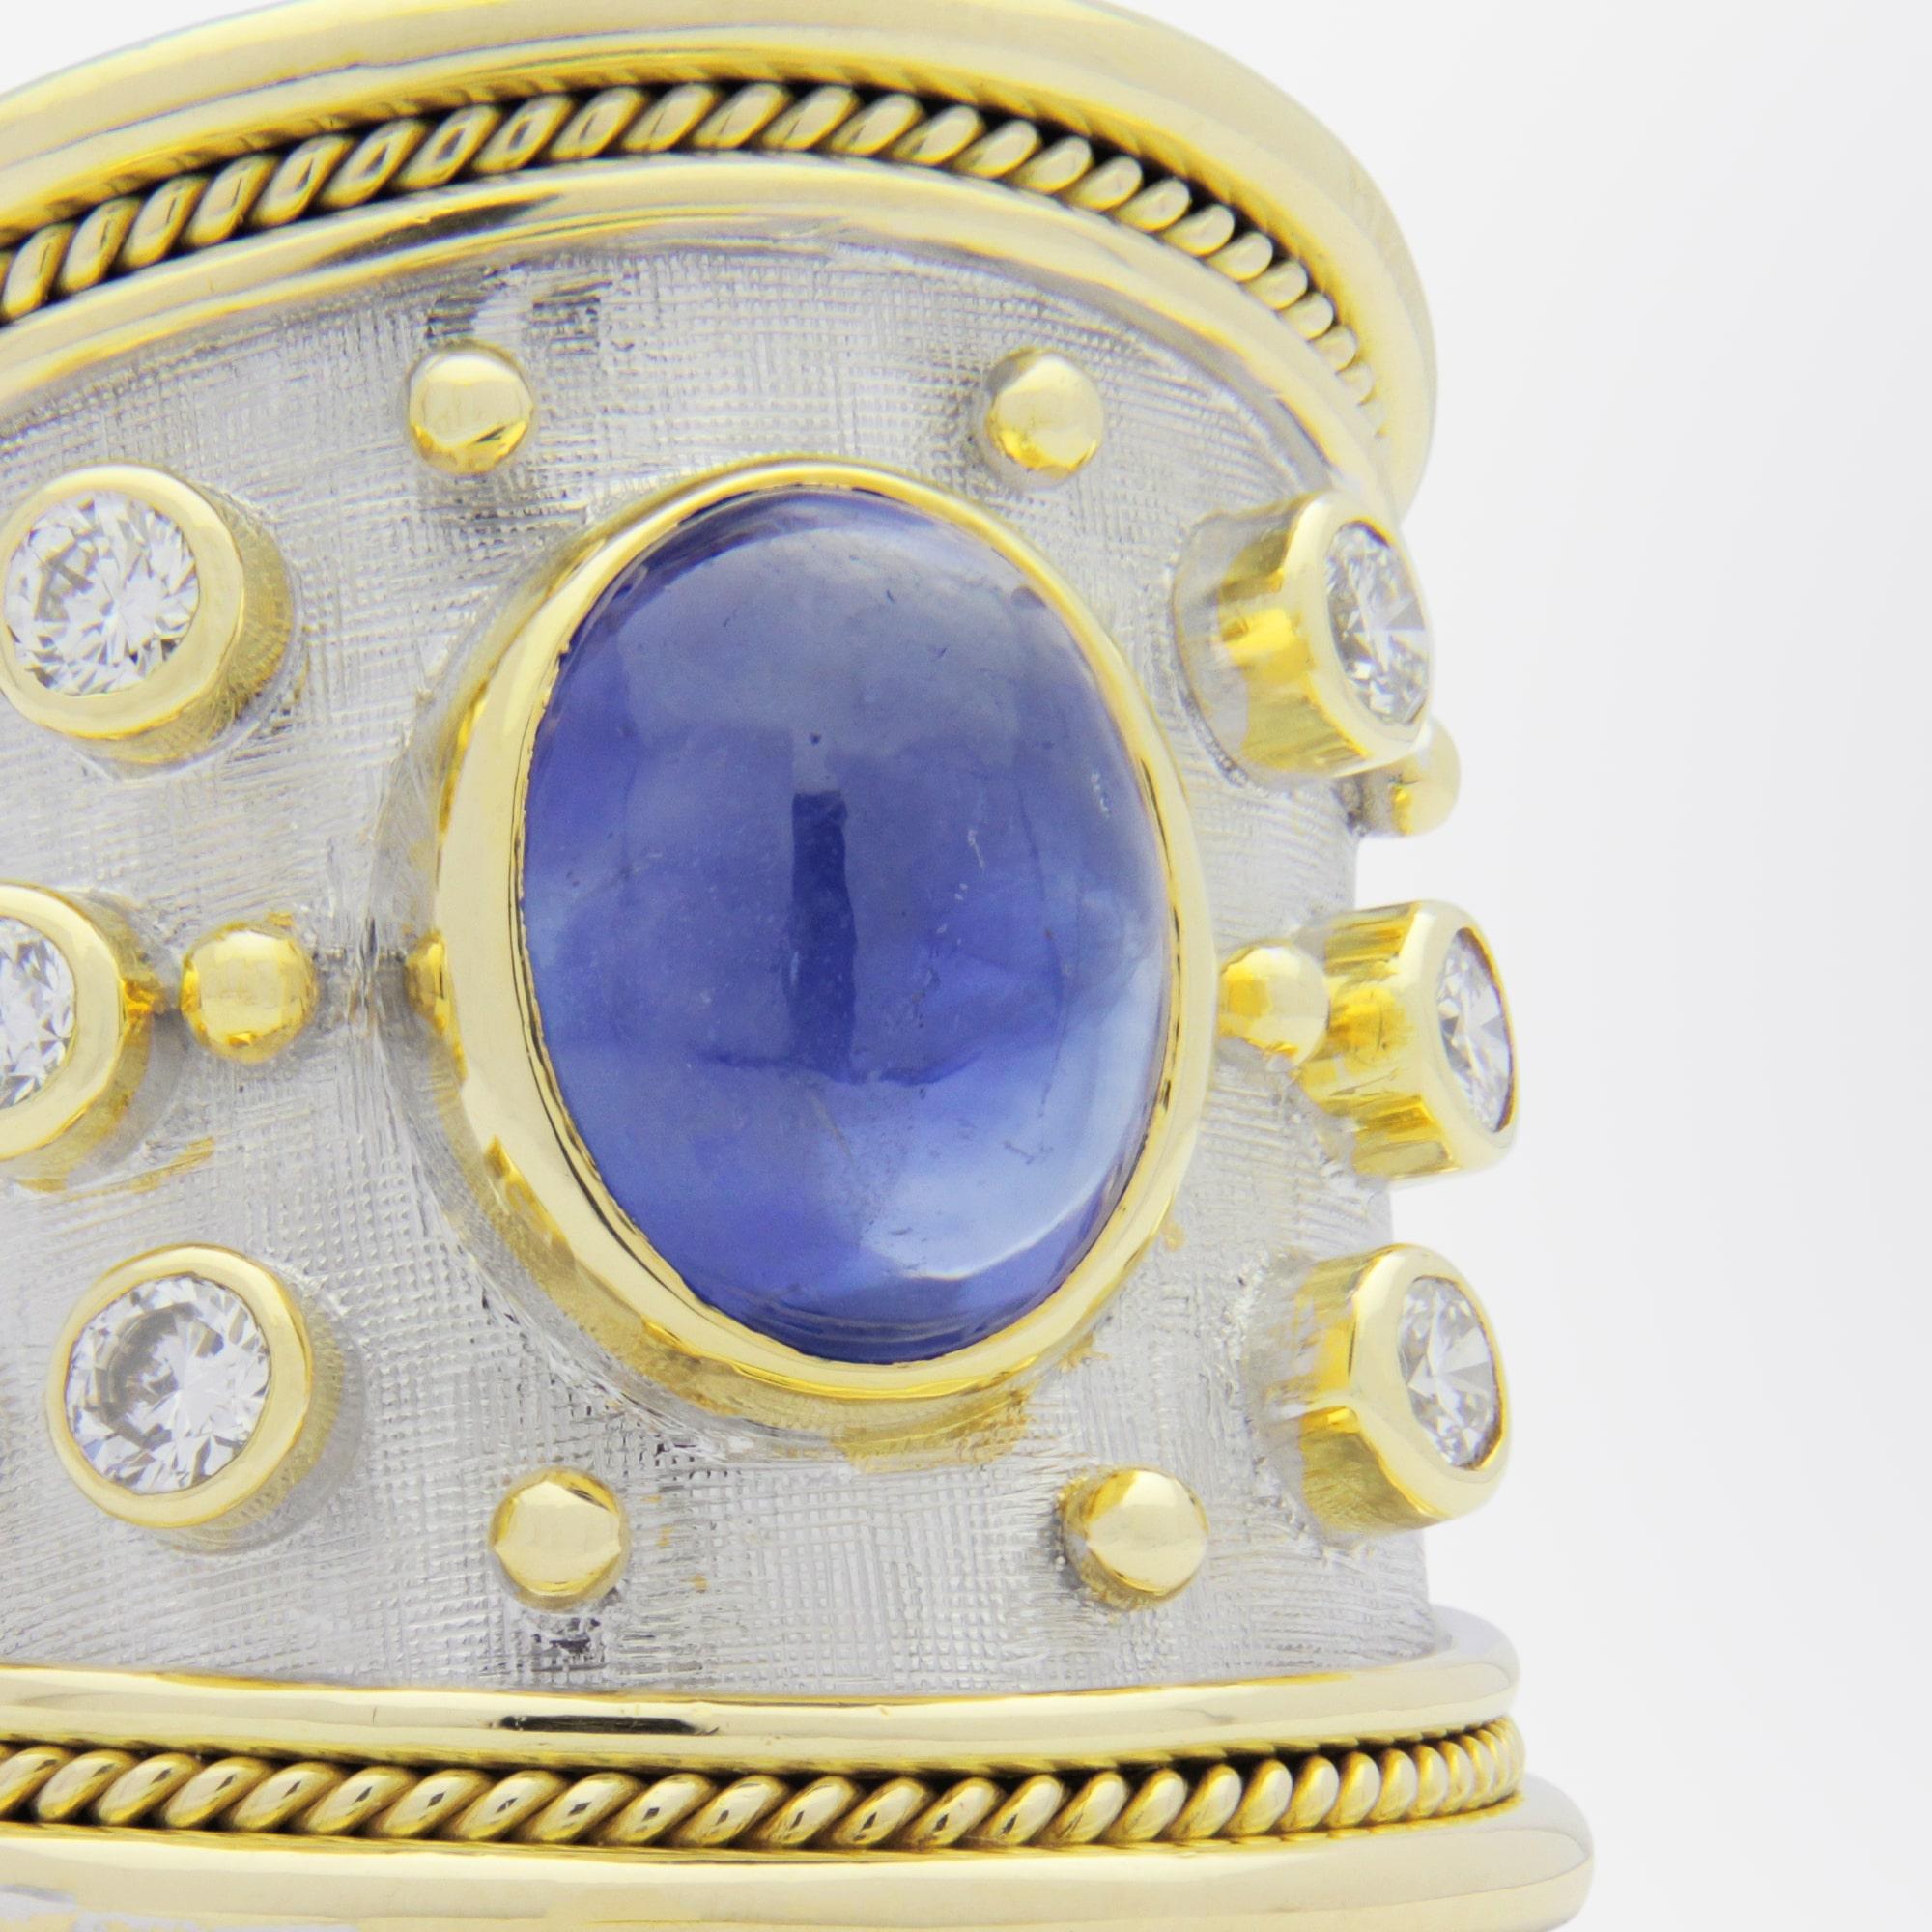 Etruscan Revival 18 Karat Gold, Elizabeth Gage 'Templar' Ring with Sapphire and Diamonds